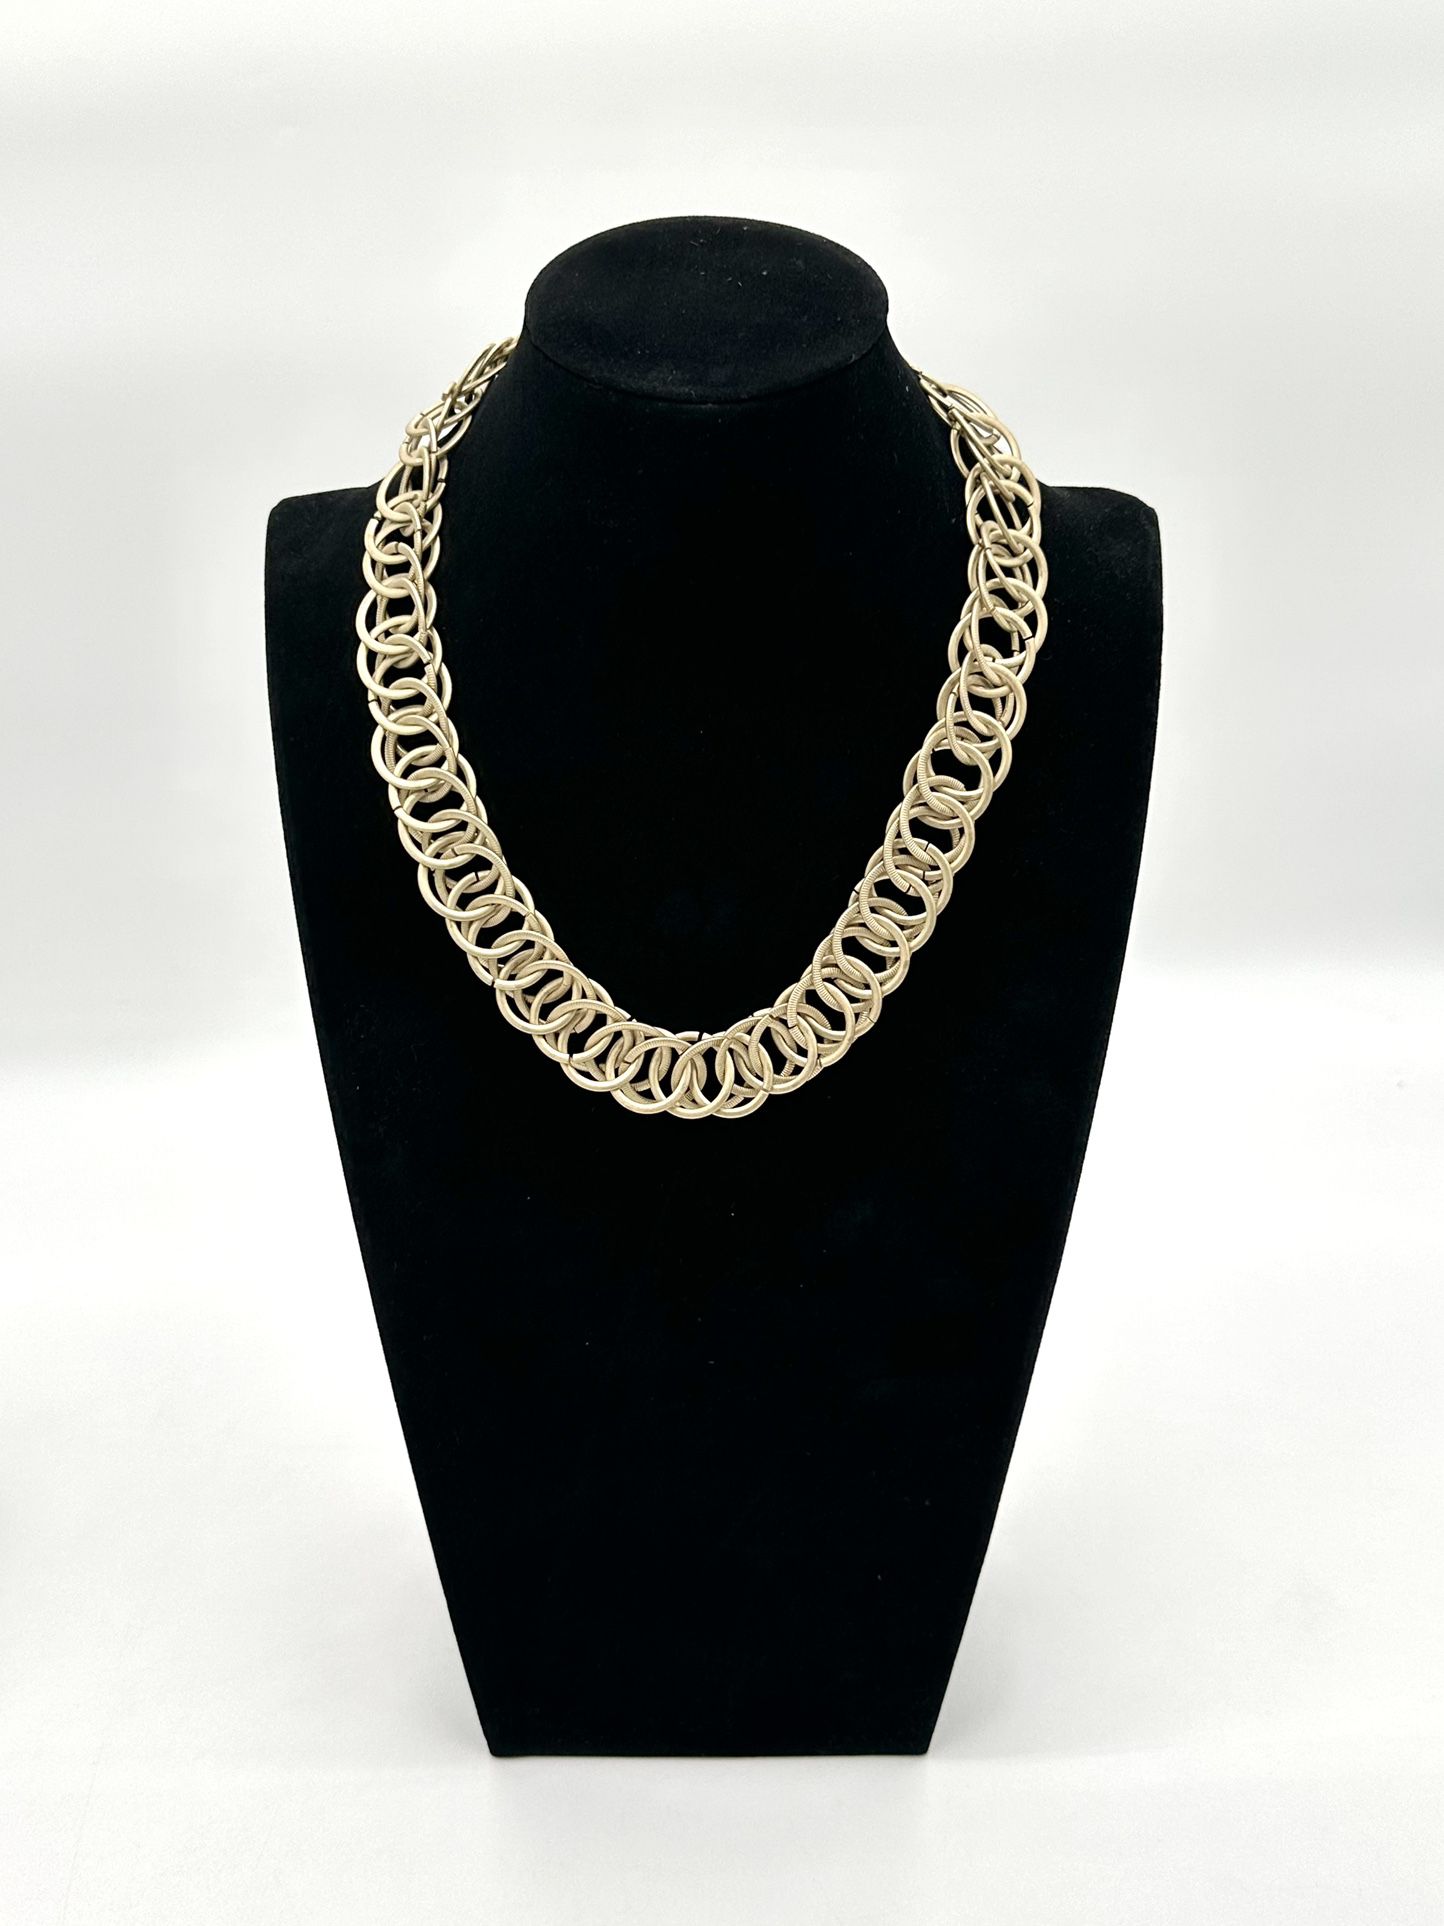 Women’s Gold Tone Costume Textured Chain Necklace